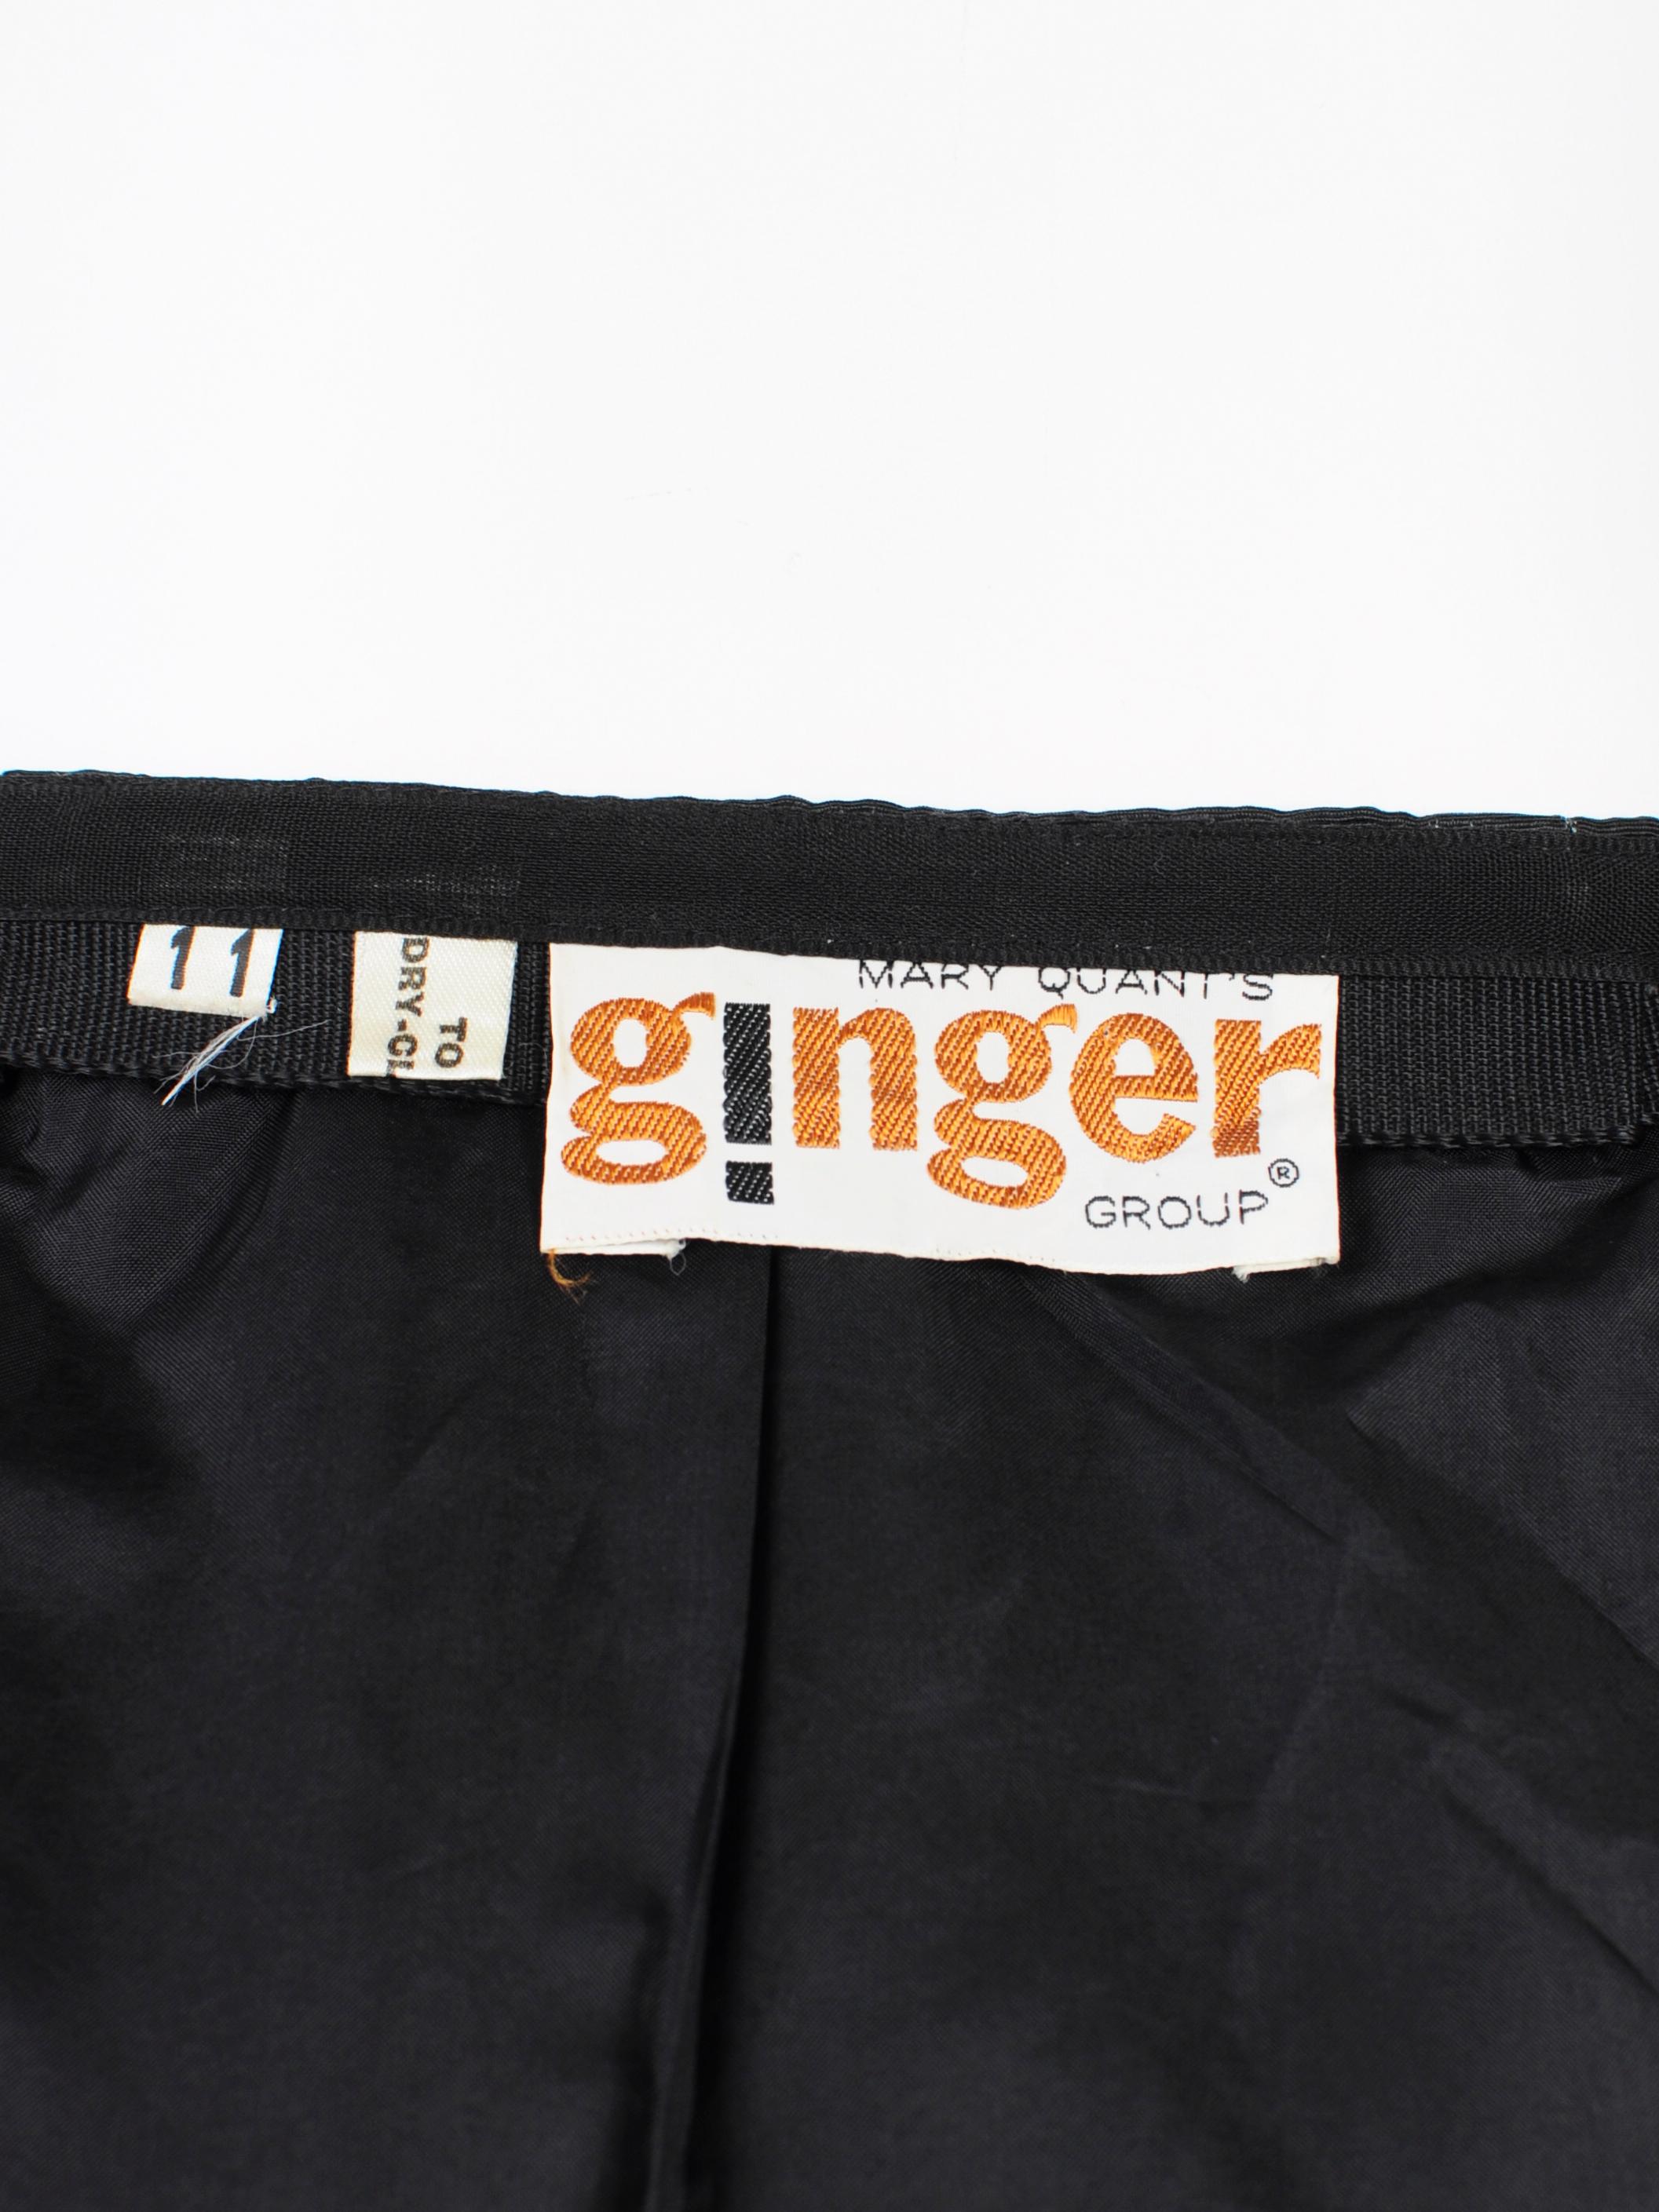 Mary Quant Ginger Group Maxi Skirt A-Line with Bow Ruffle Hem 1960s For Sale 2